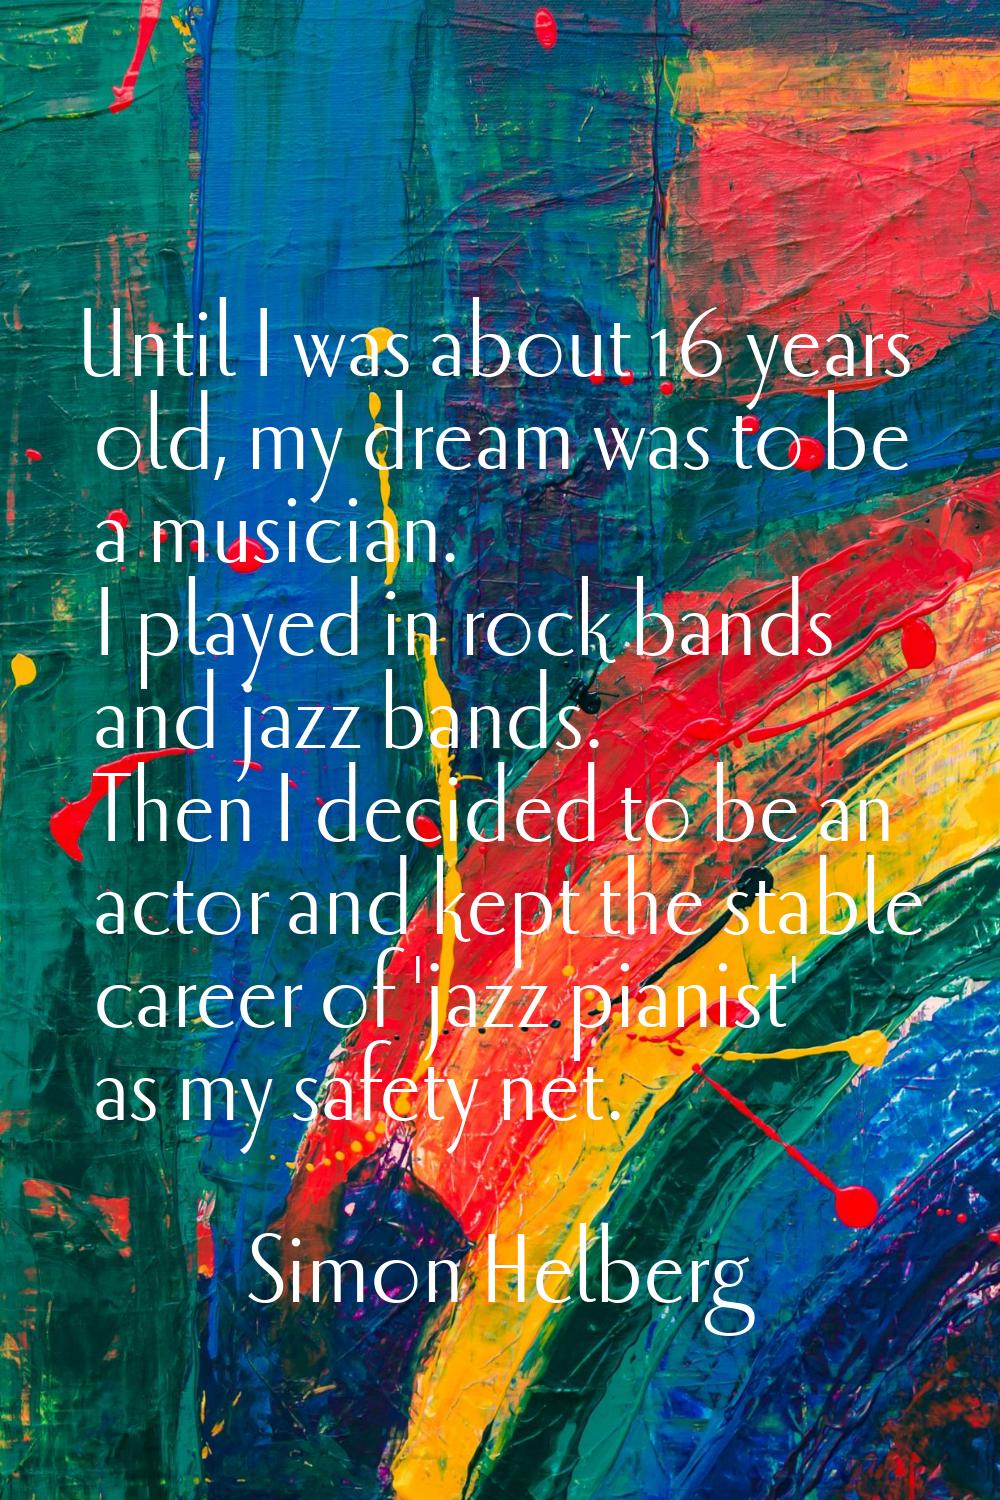 Until I was about 16 years old, my dream was to be a musician. I played in rock bands and jazz band